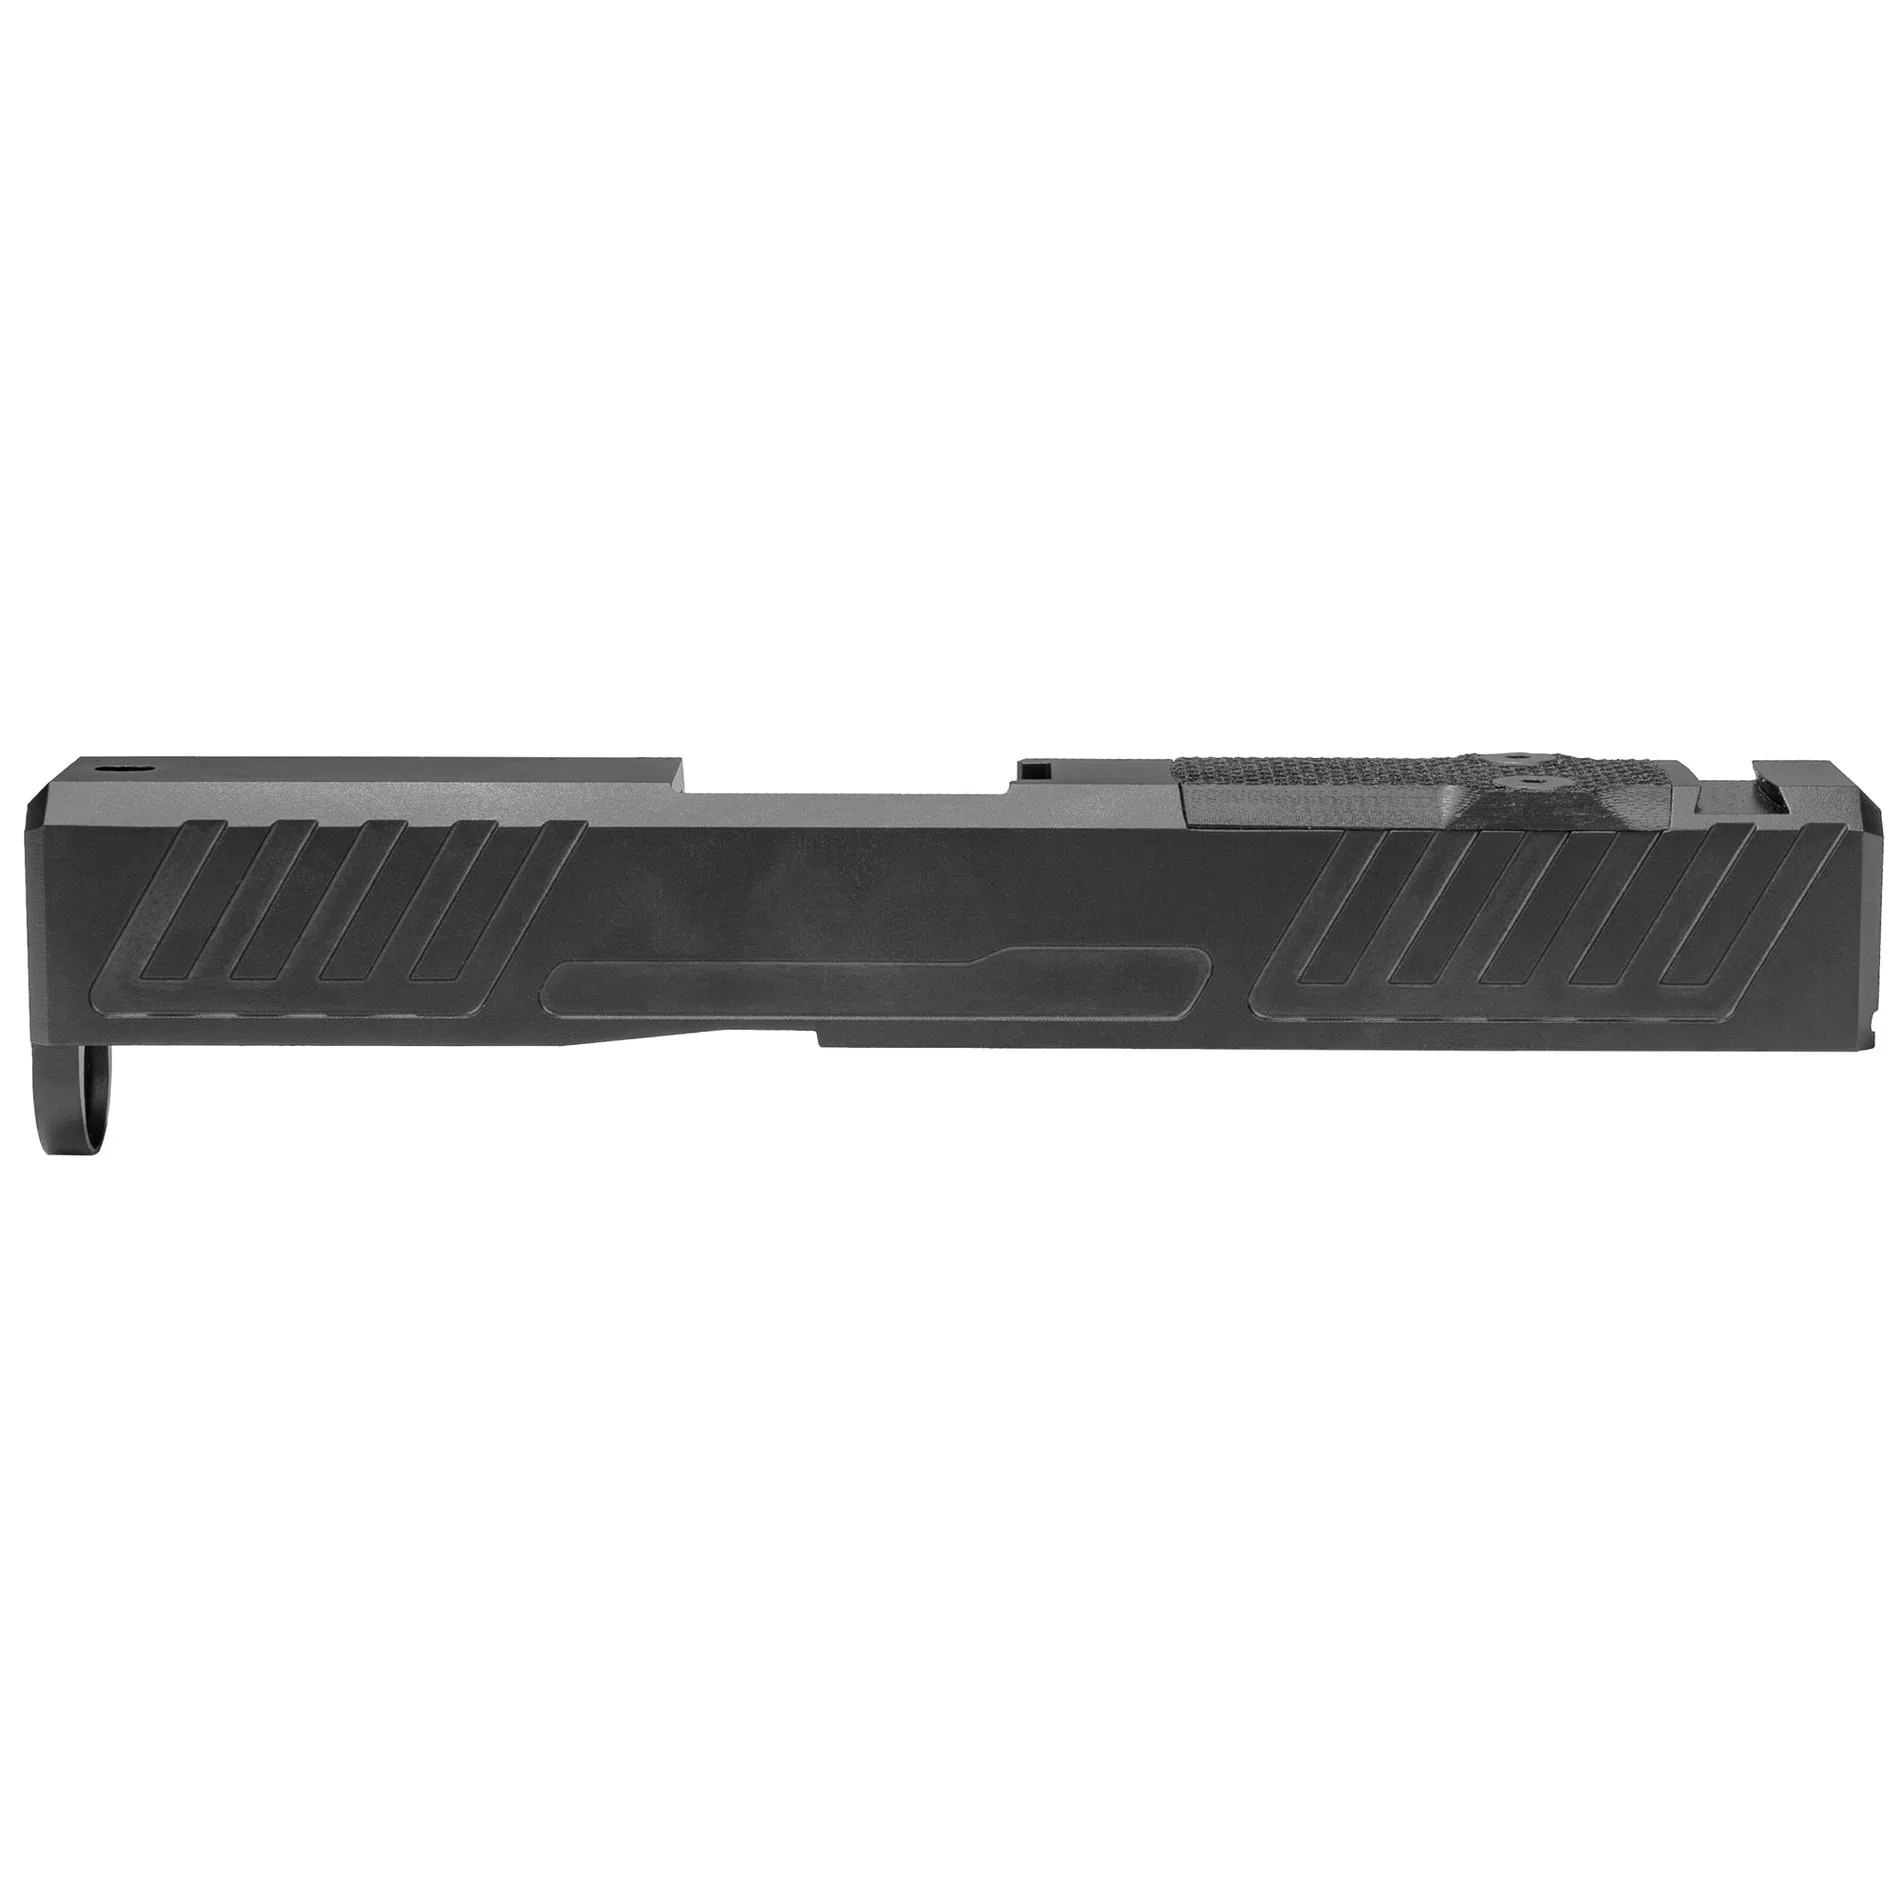 Grey Ghost Precision V1 Stripped Slide for Glock 43/43X/48 with RMSc Optic Footprint